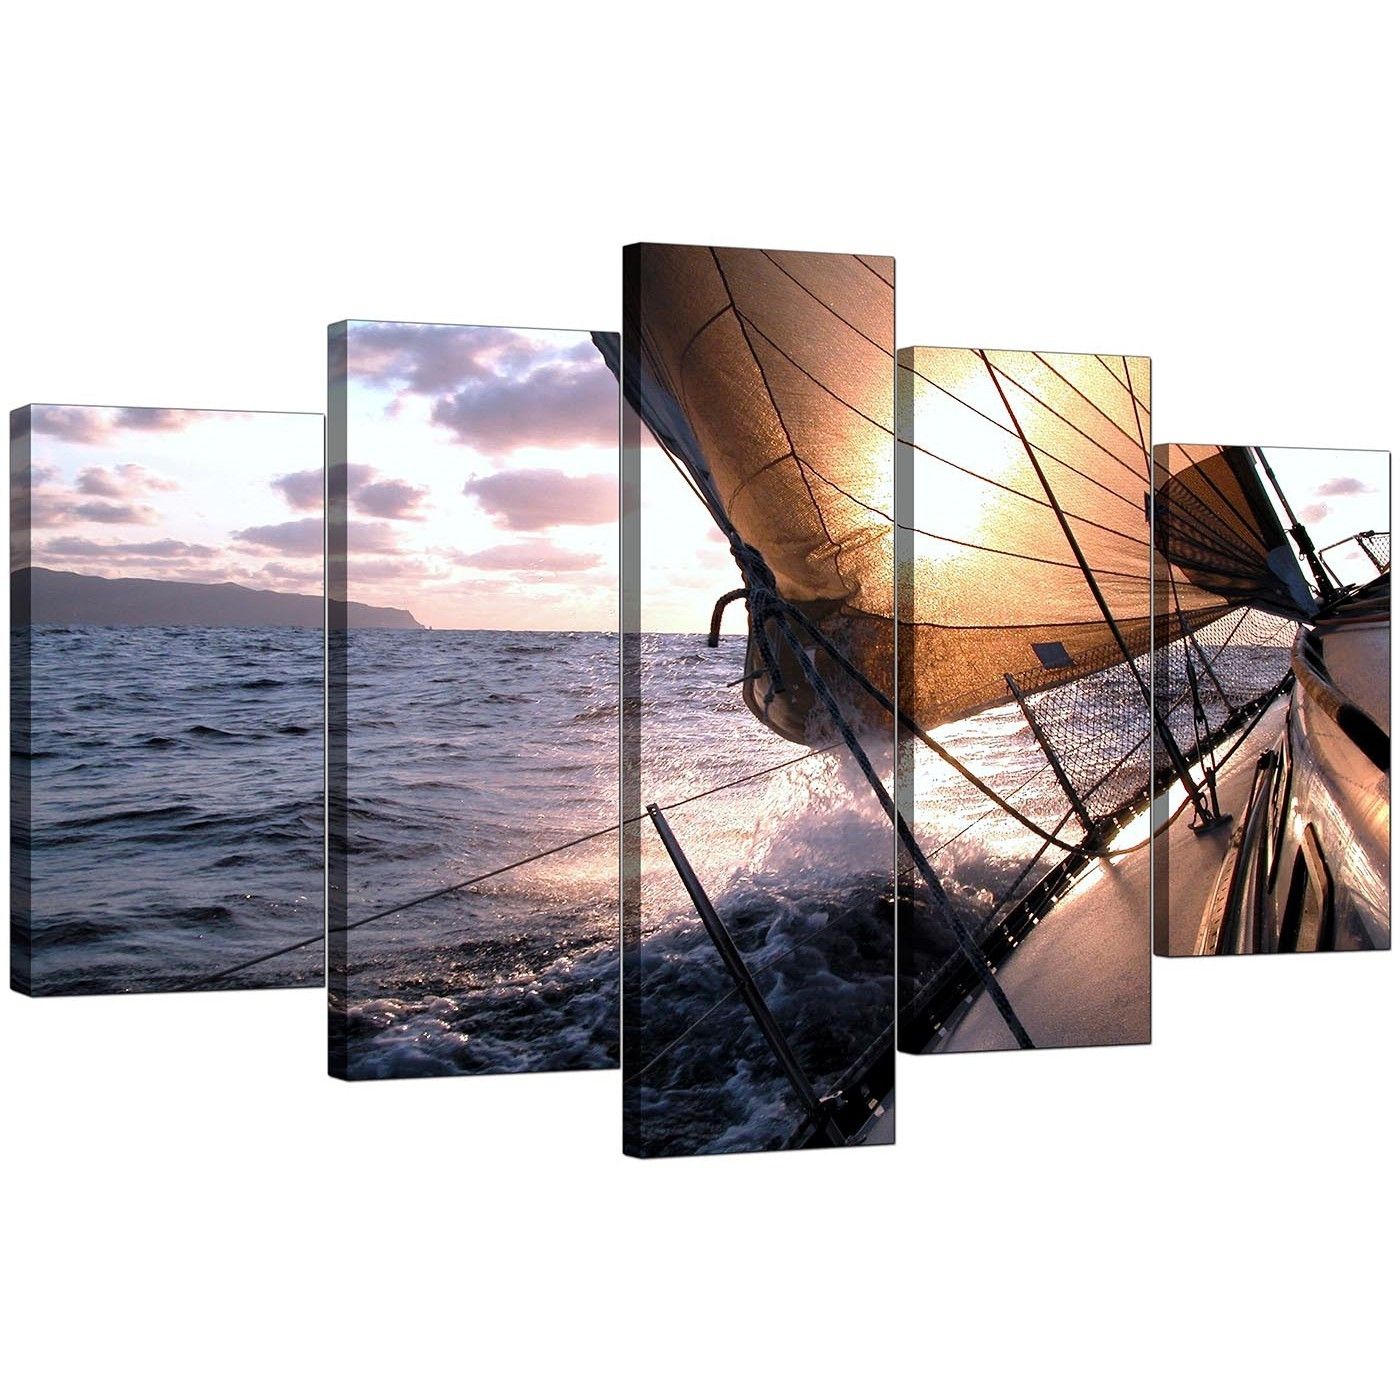 Boat Canvas Prints Uk For Your Living Room – 5 Piece Inside Five Piece Canvas Wall Art (View 2 of 20)